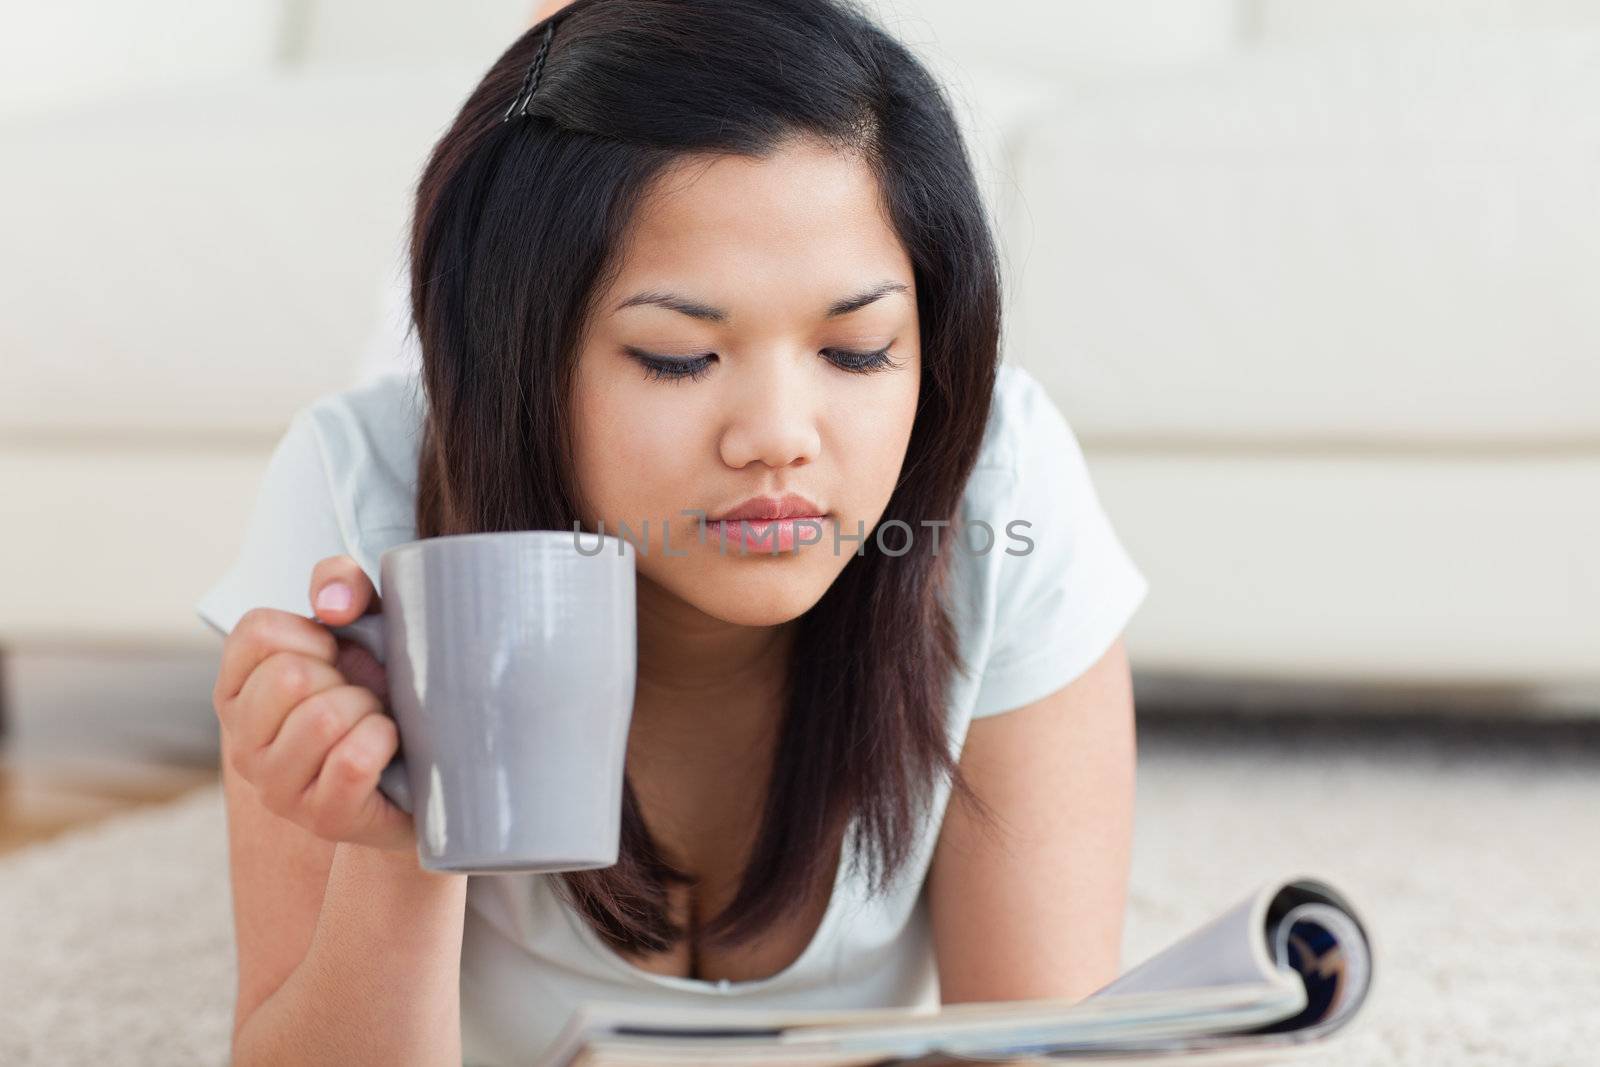 Woman holding a mug while reading a magazine in a living room